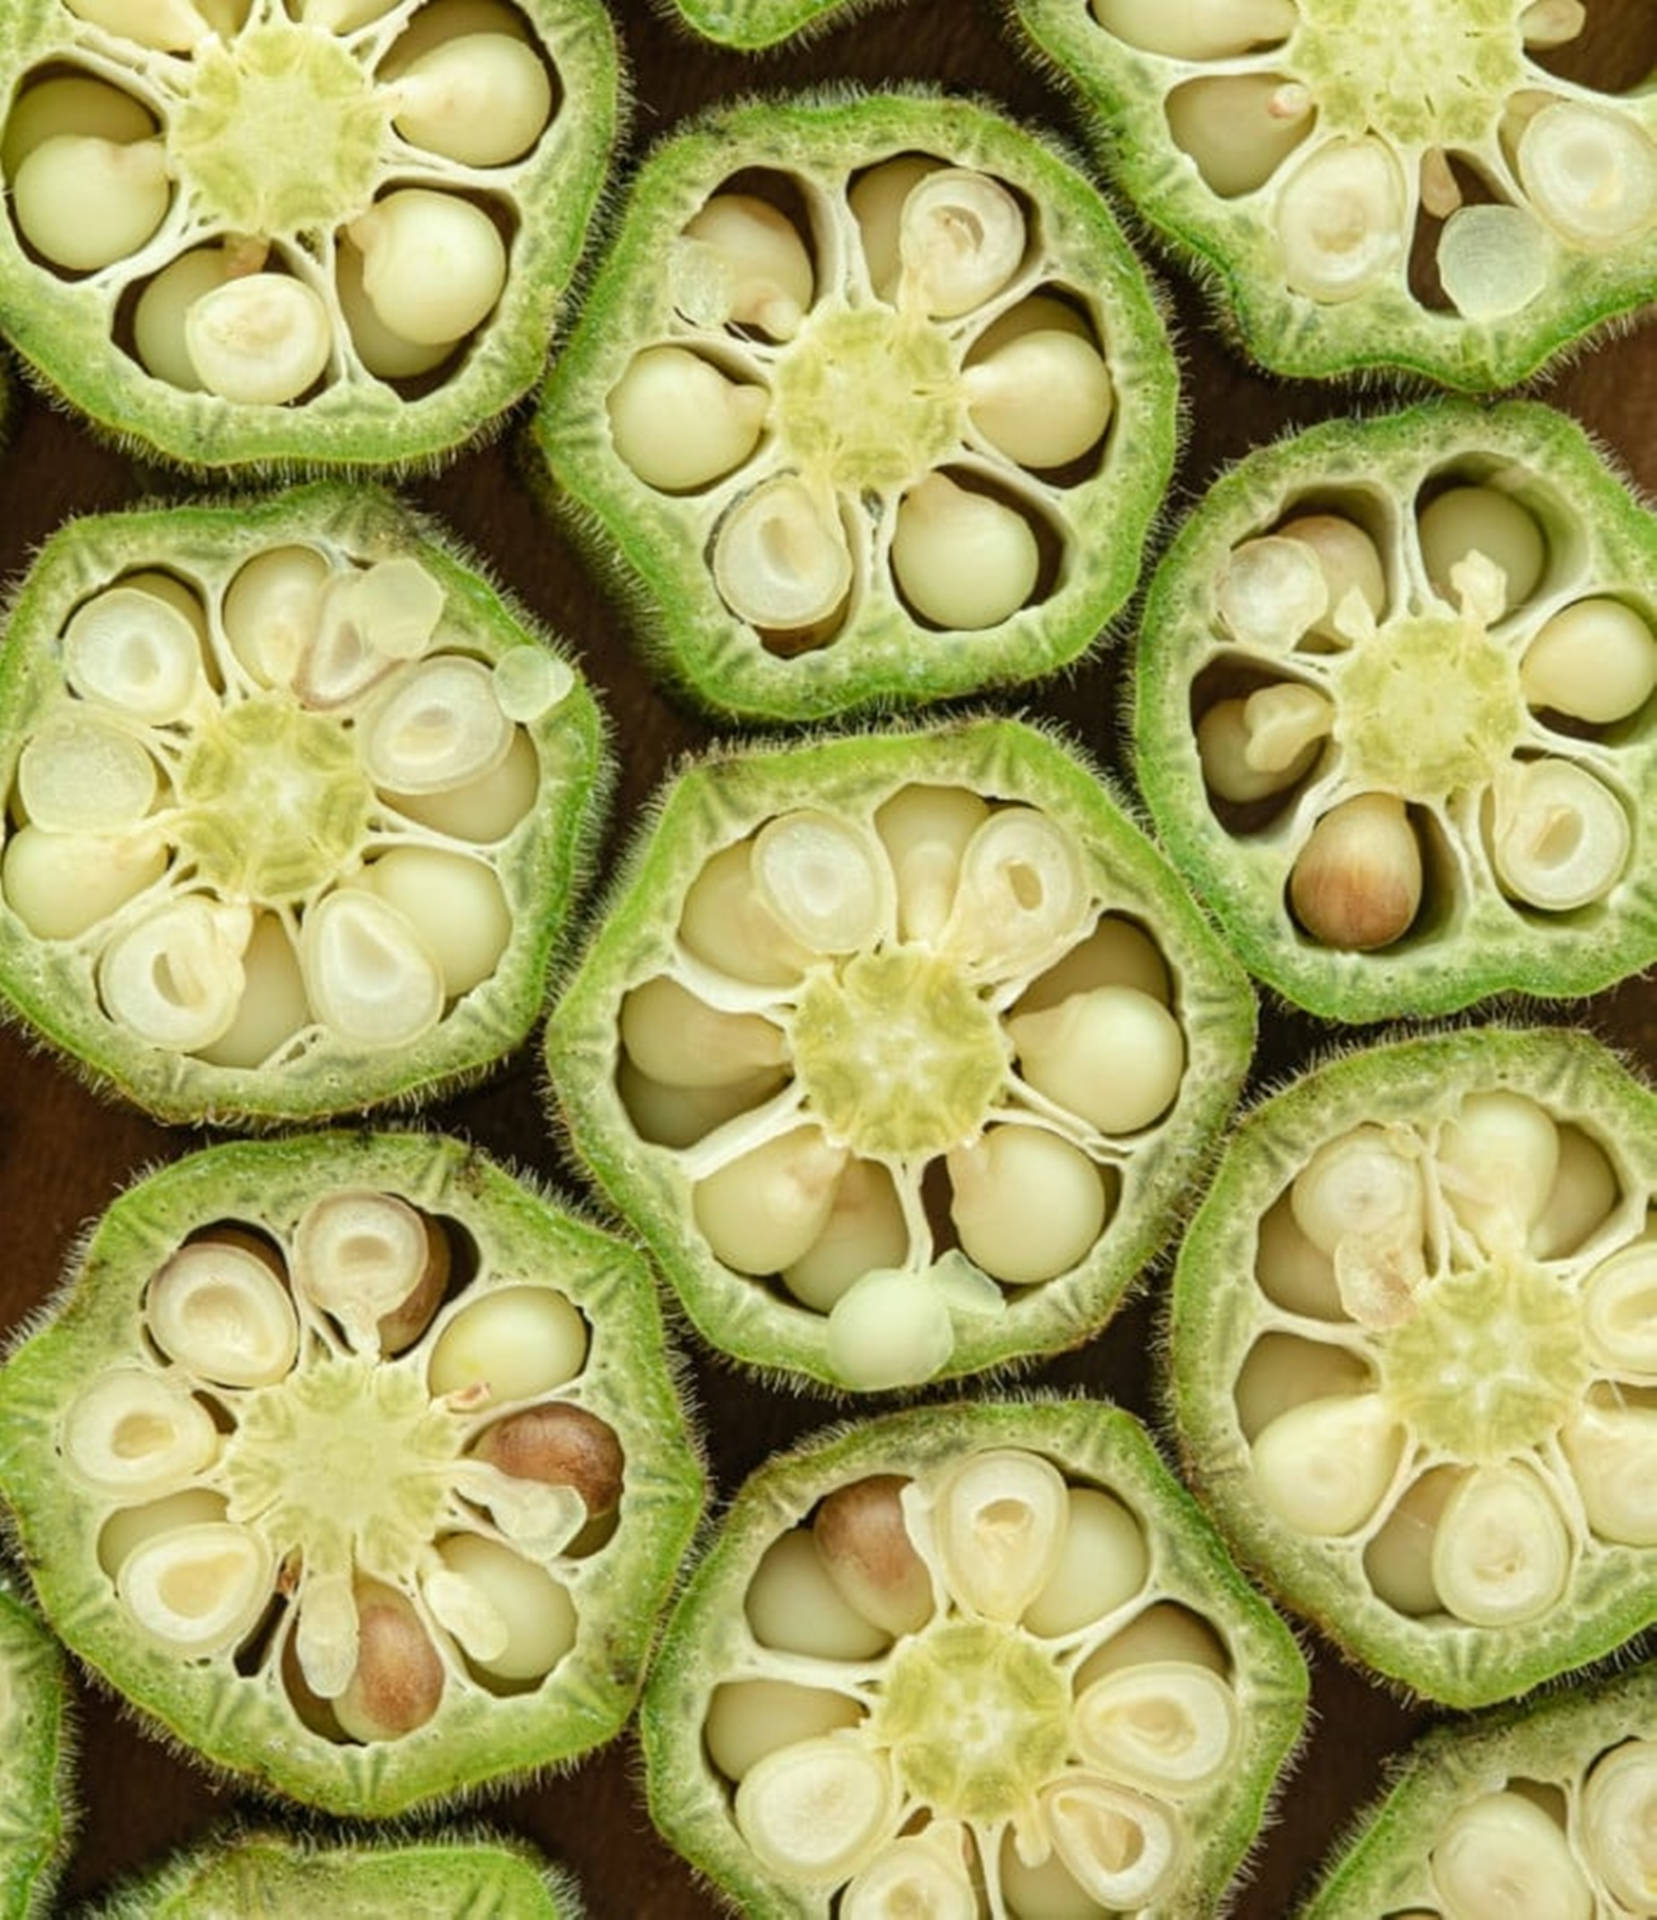 Chopped Okra With Seeds Wallpaper